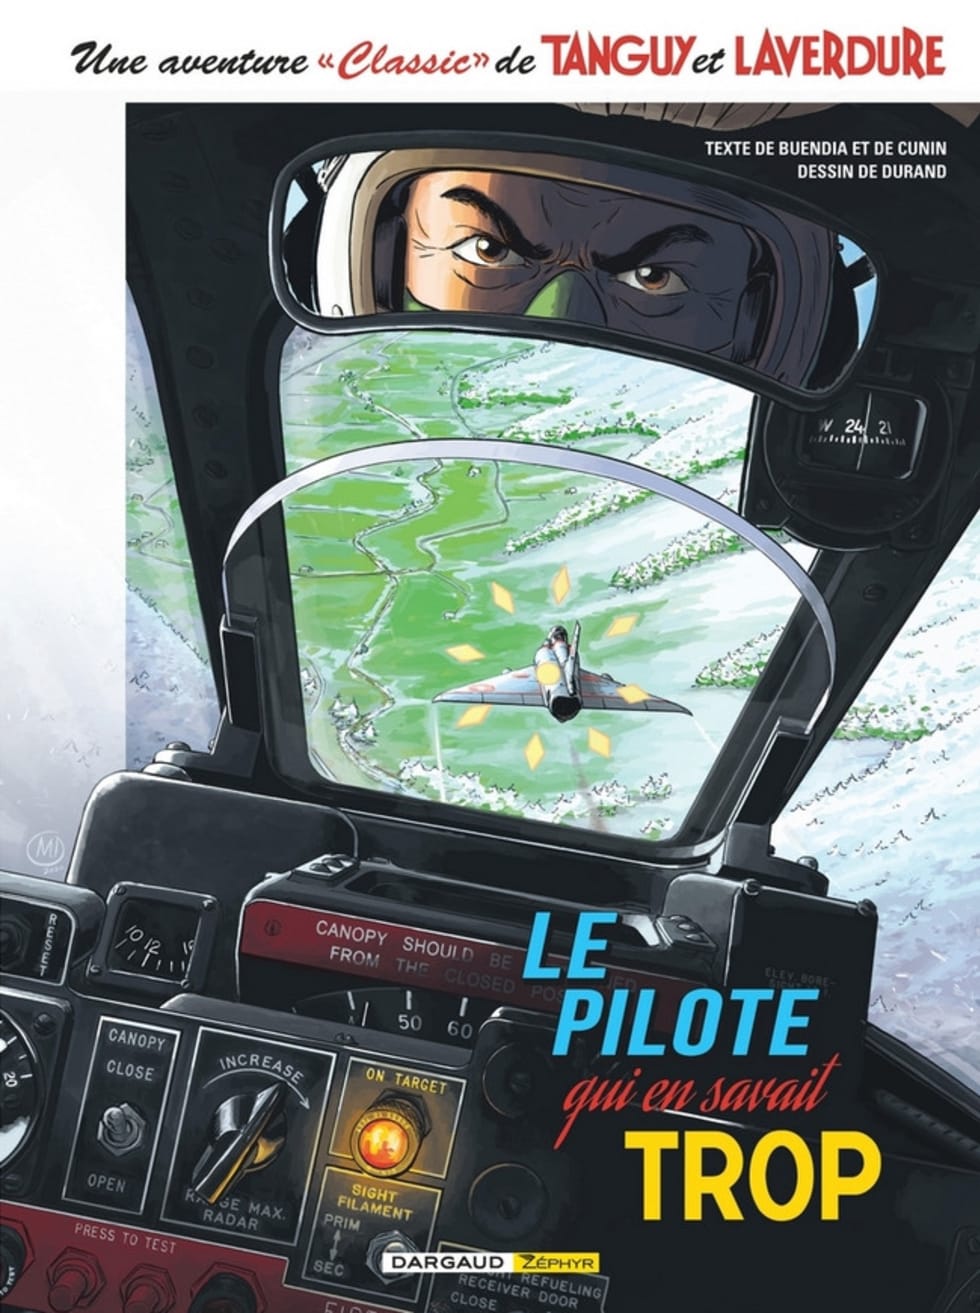 Comic Book. “Tanguy and Laverdure - Classic, Volume 4: The Pilot who knew too much”